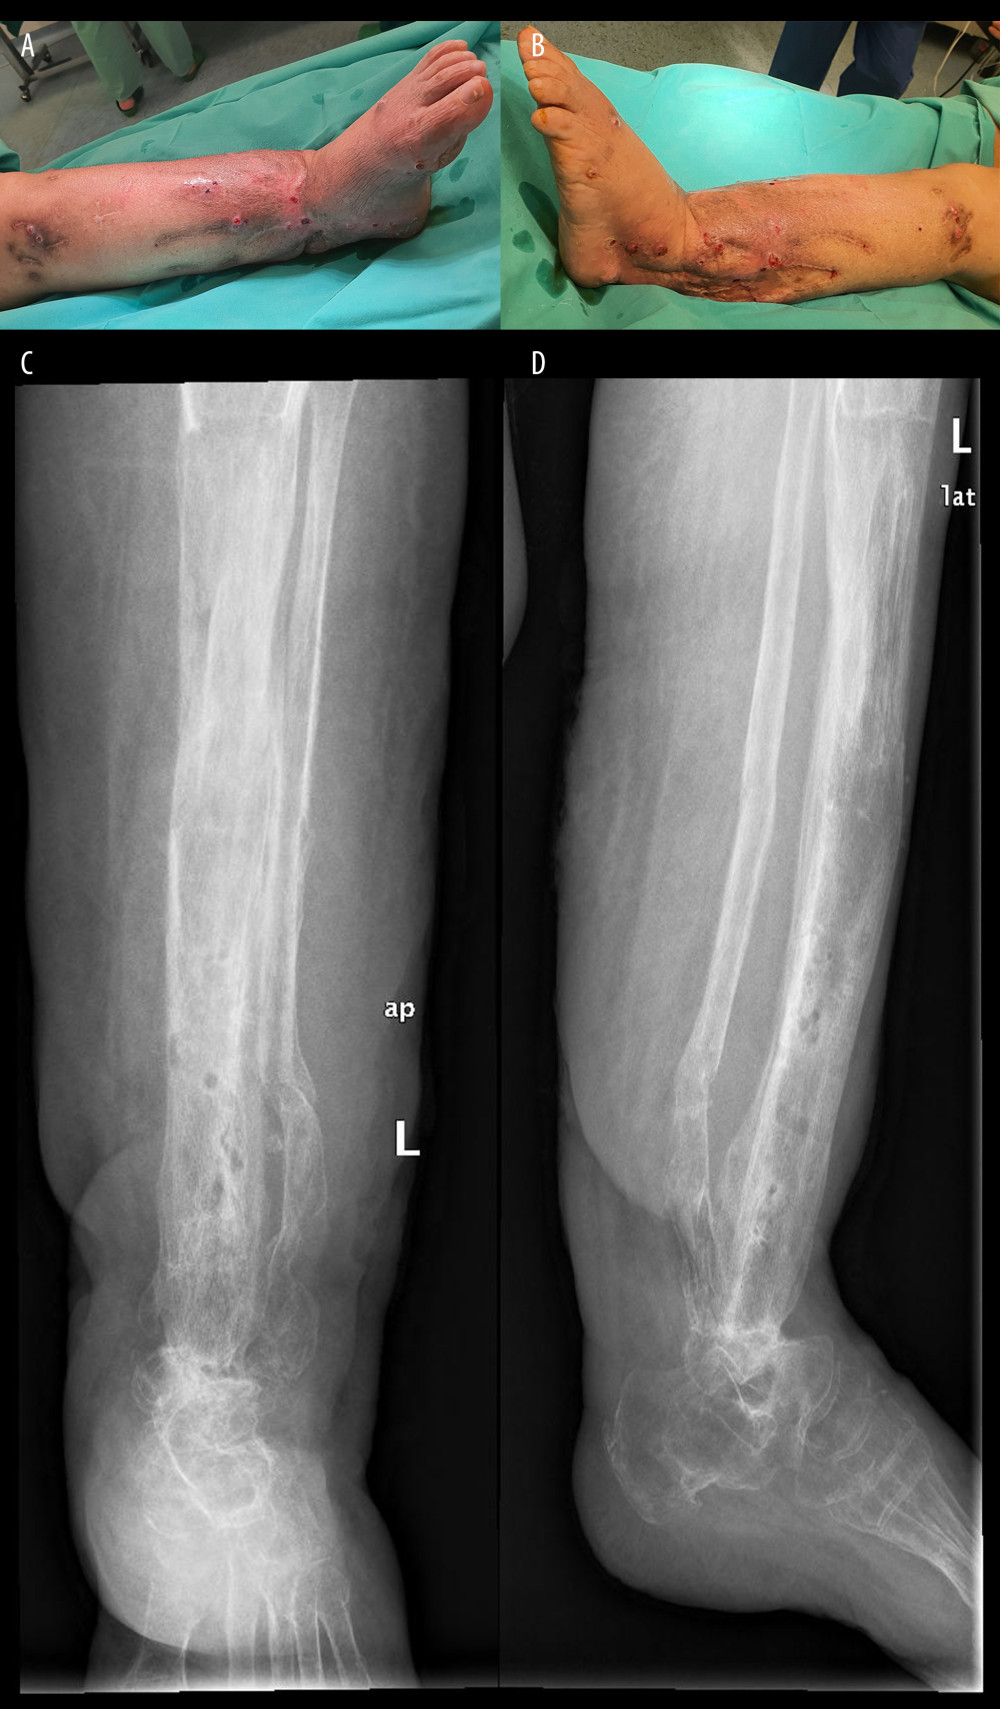 Clinical and radiological appearance of the leg after removal of the Ilizarov frame. (A) Anteroposterior clinical view. (B) Lateral clinical view. (C) Standard anteroposterior xray of the regenerated bone and ankle fusion and (D) standard lateral xray of the regenerated bone and ankle fusion.